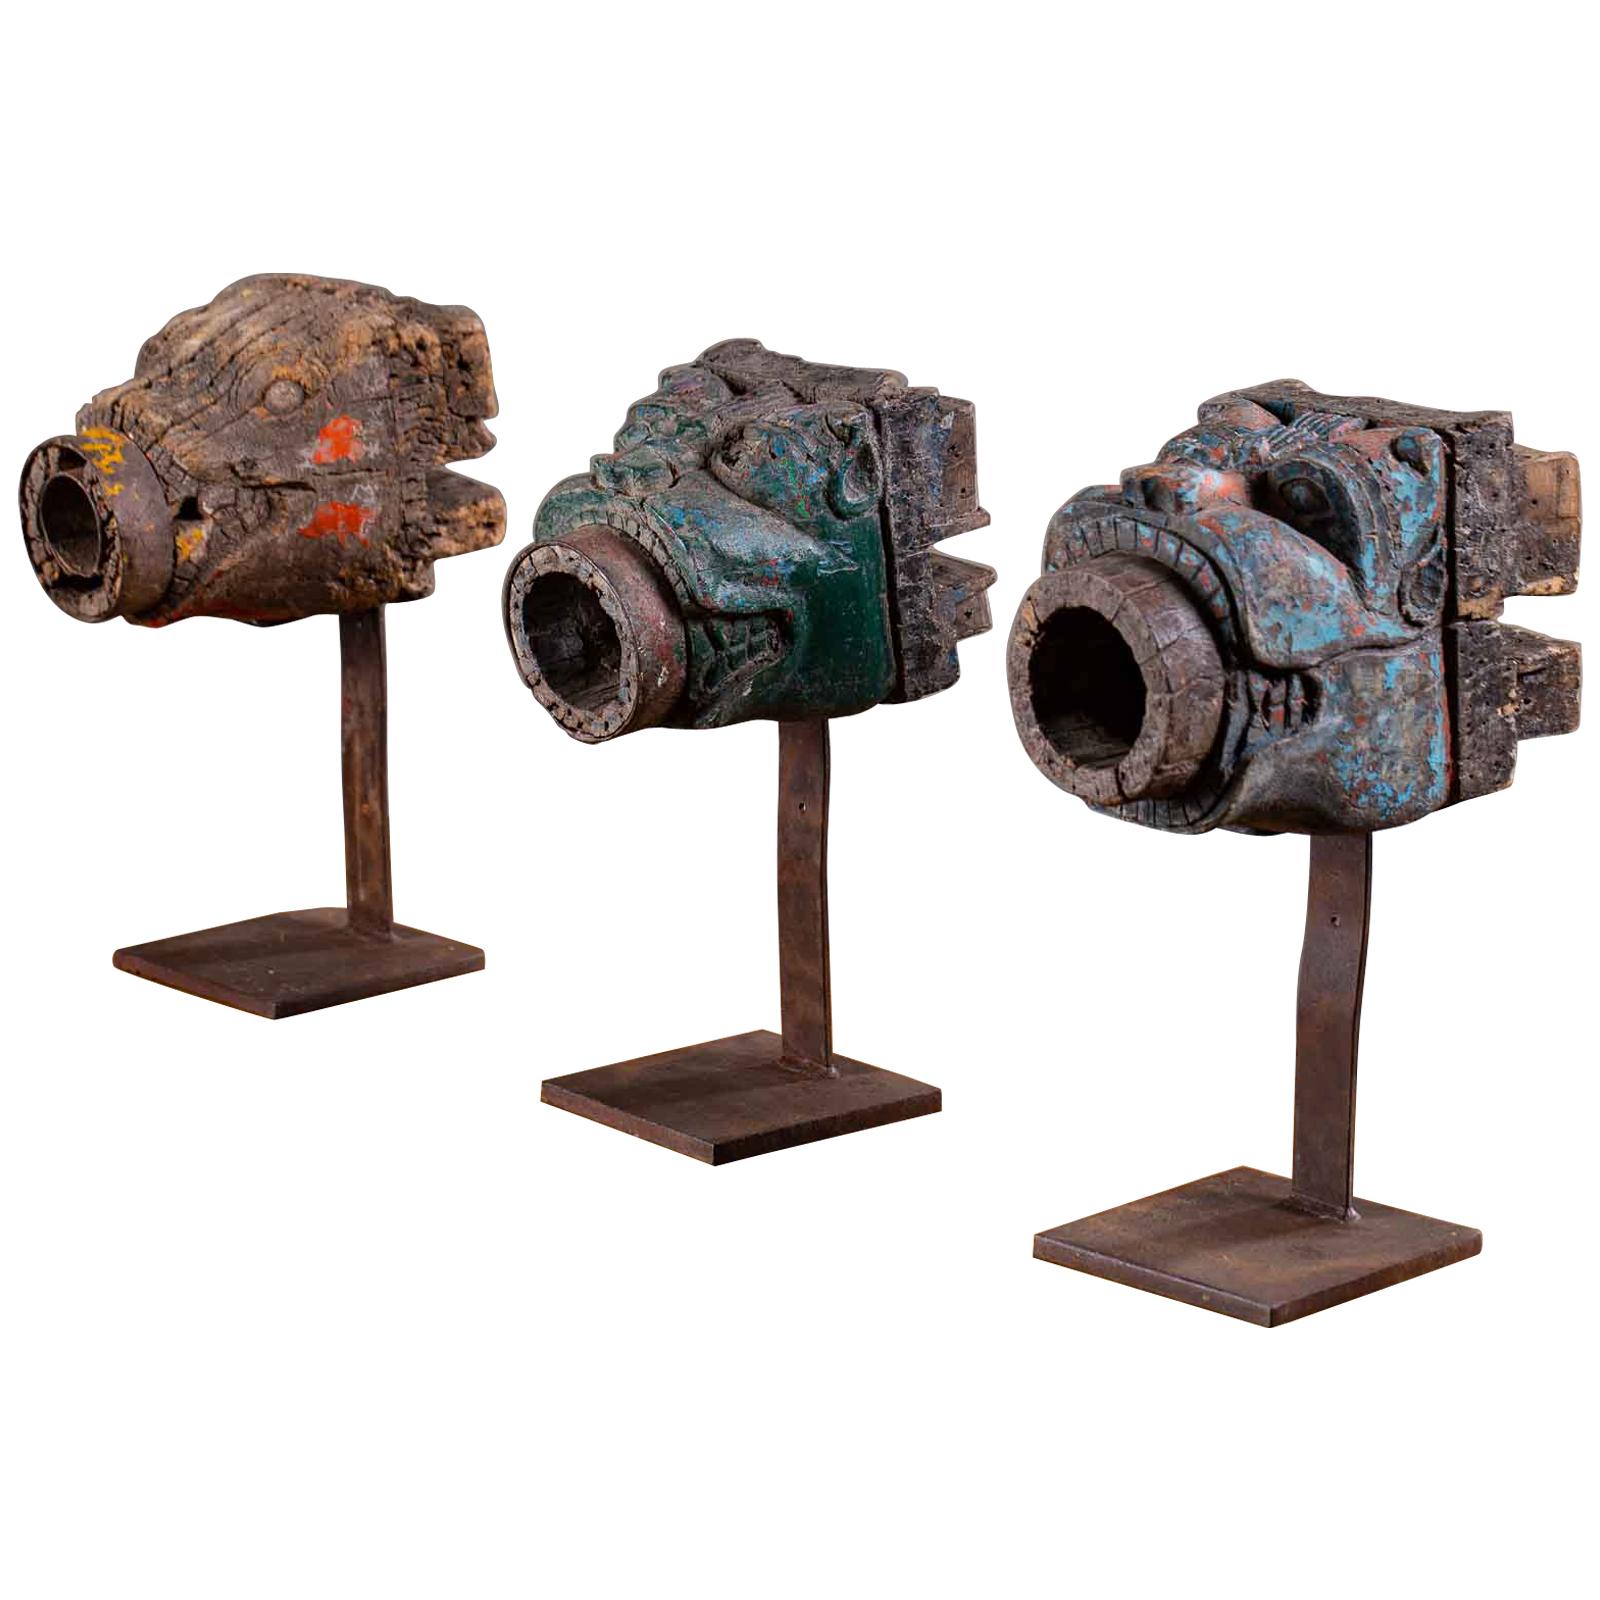 Set of Three Painted Carved Animal Head Sculptures on Stands from Indonesia